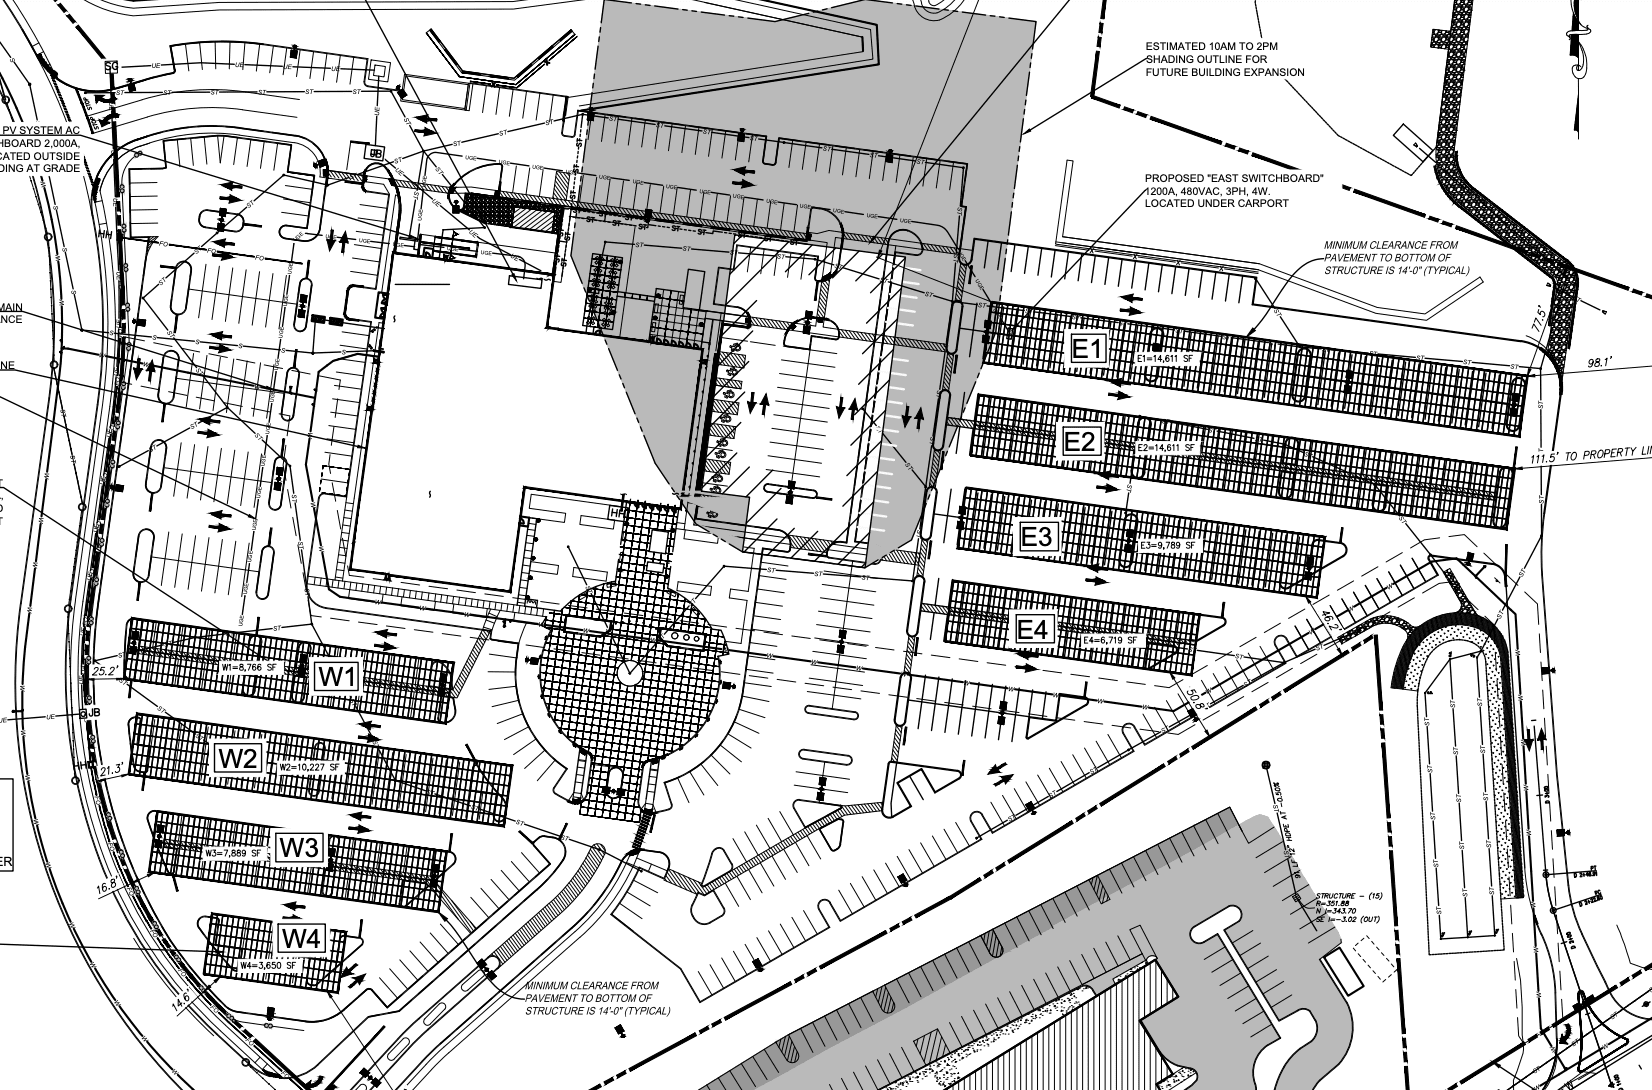 The site plan of Ayco with the solar canopies.